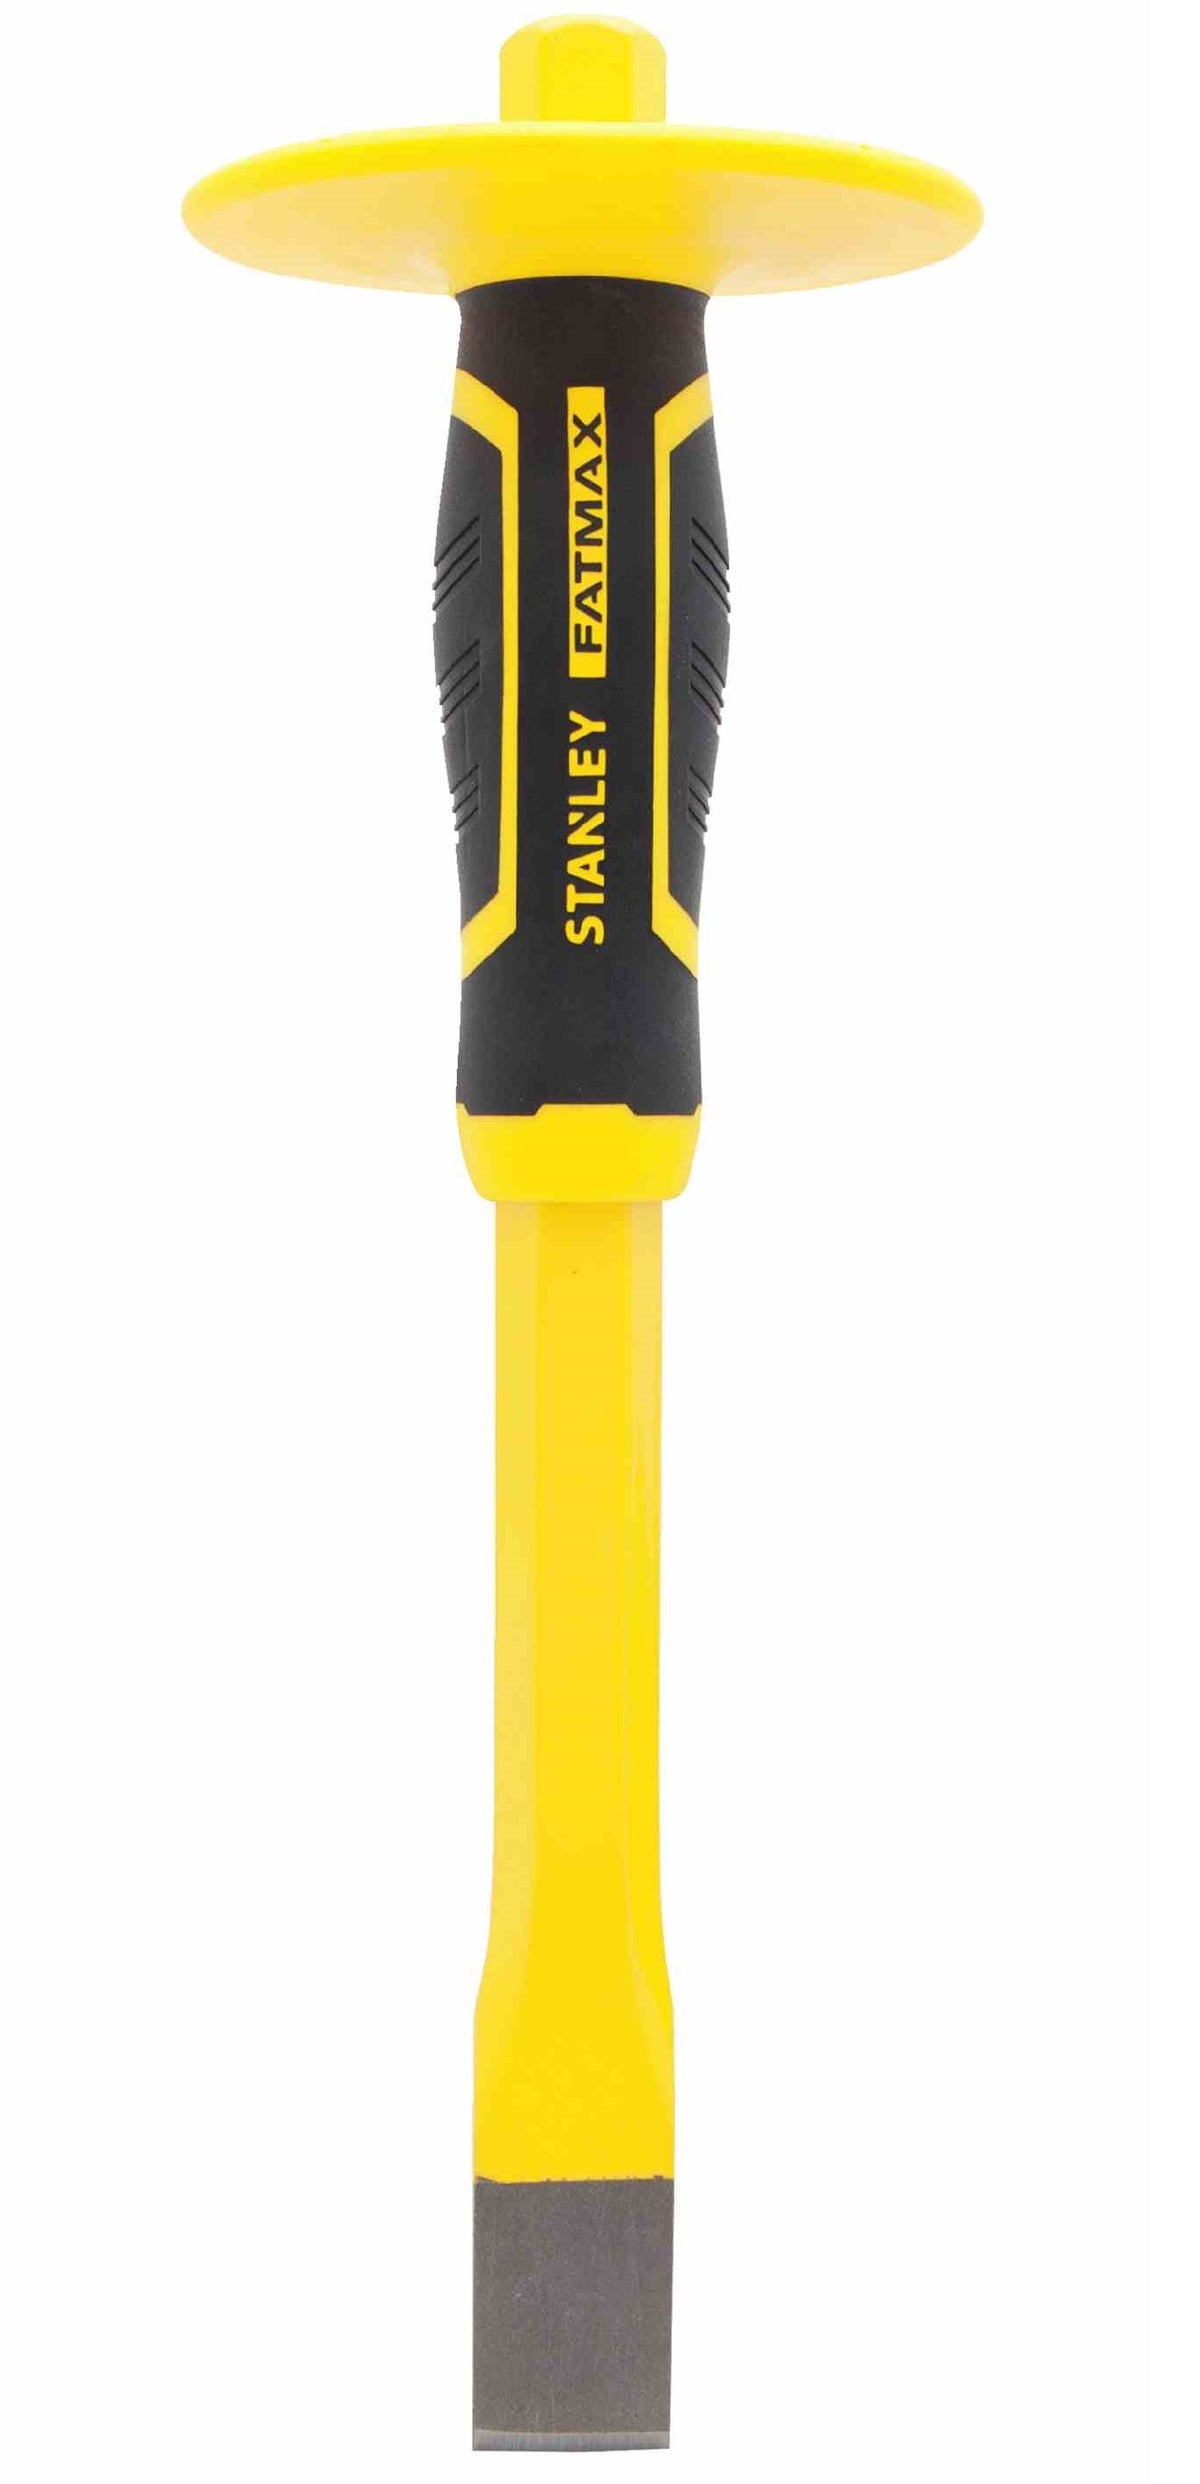 Stanley FMHT16494 FatMax Cold Chisel With Guard, Yellow/Black